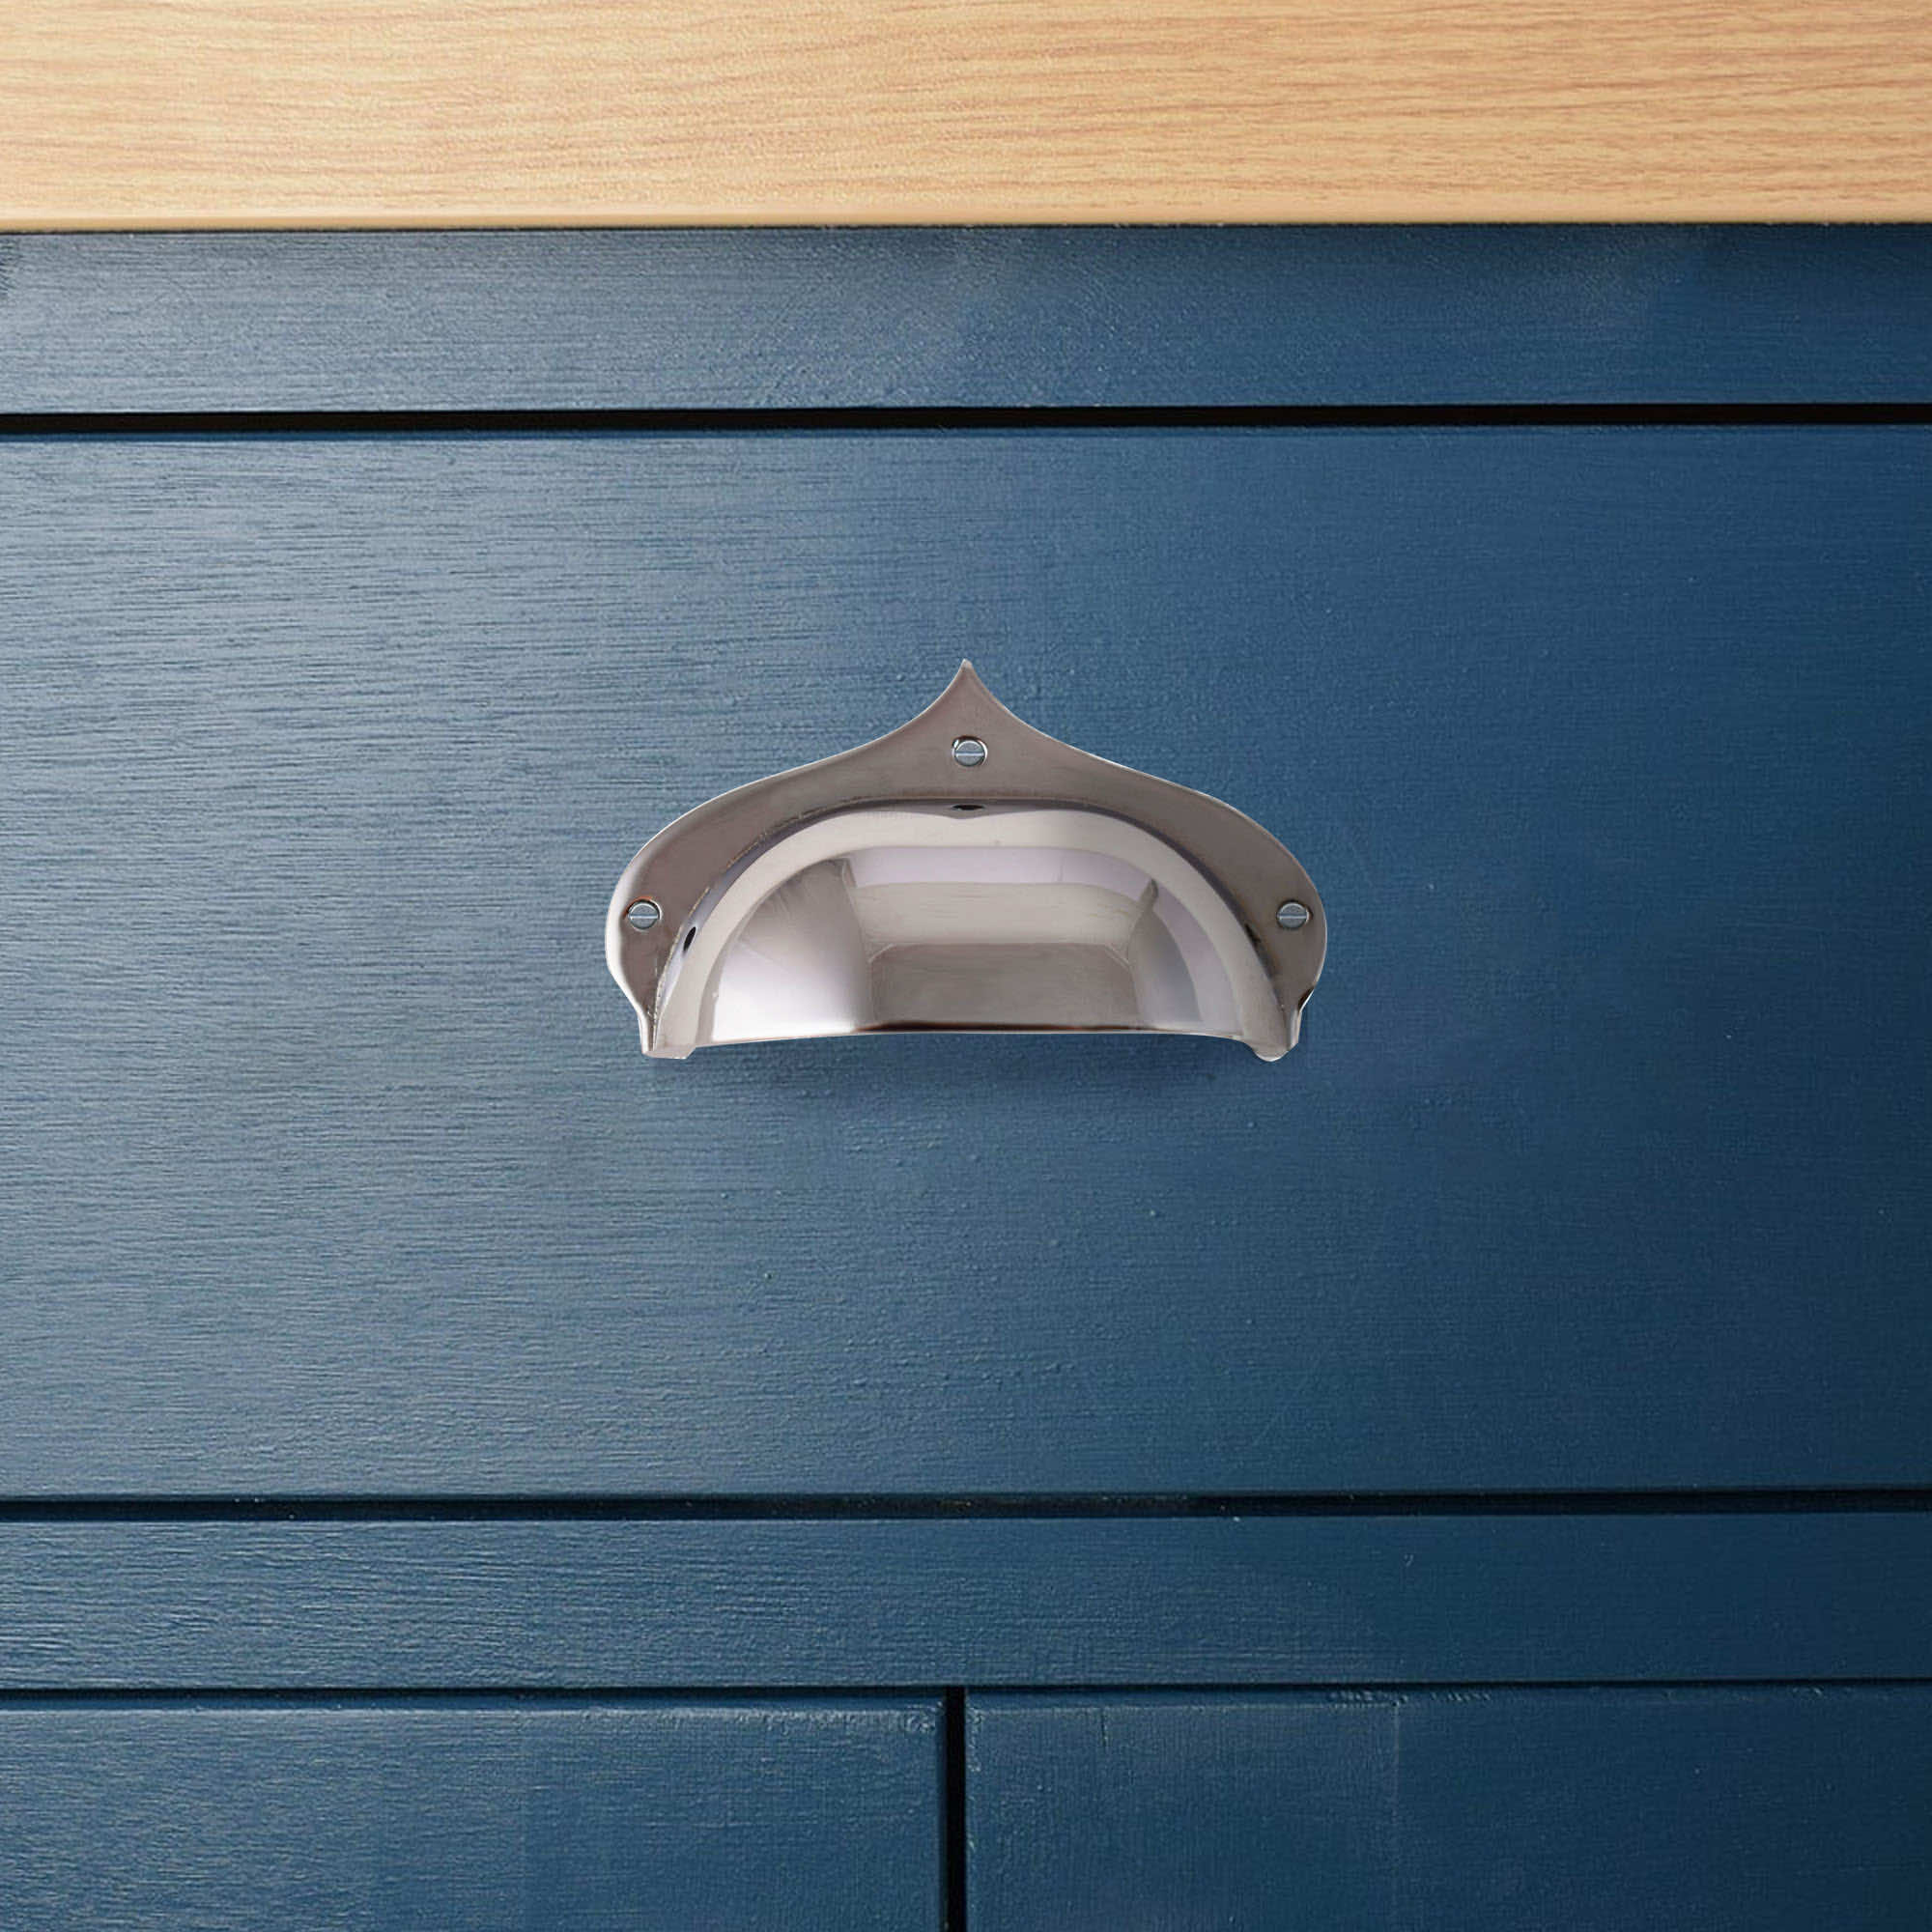 chrome pavilion cup handle on blue kitchen drawers